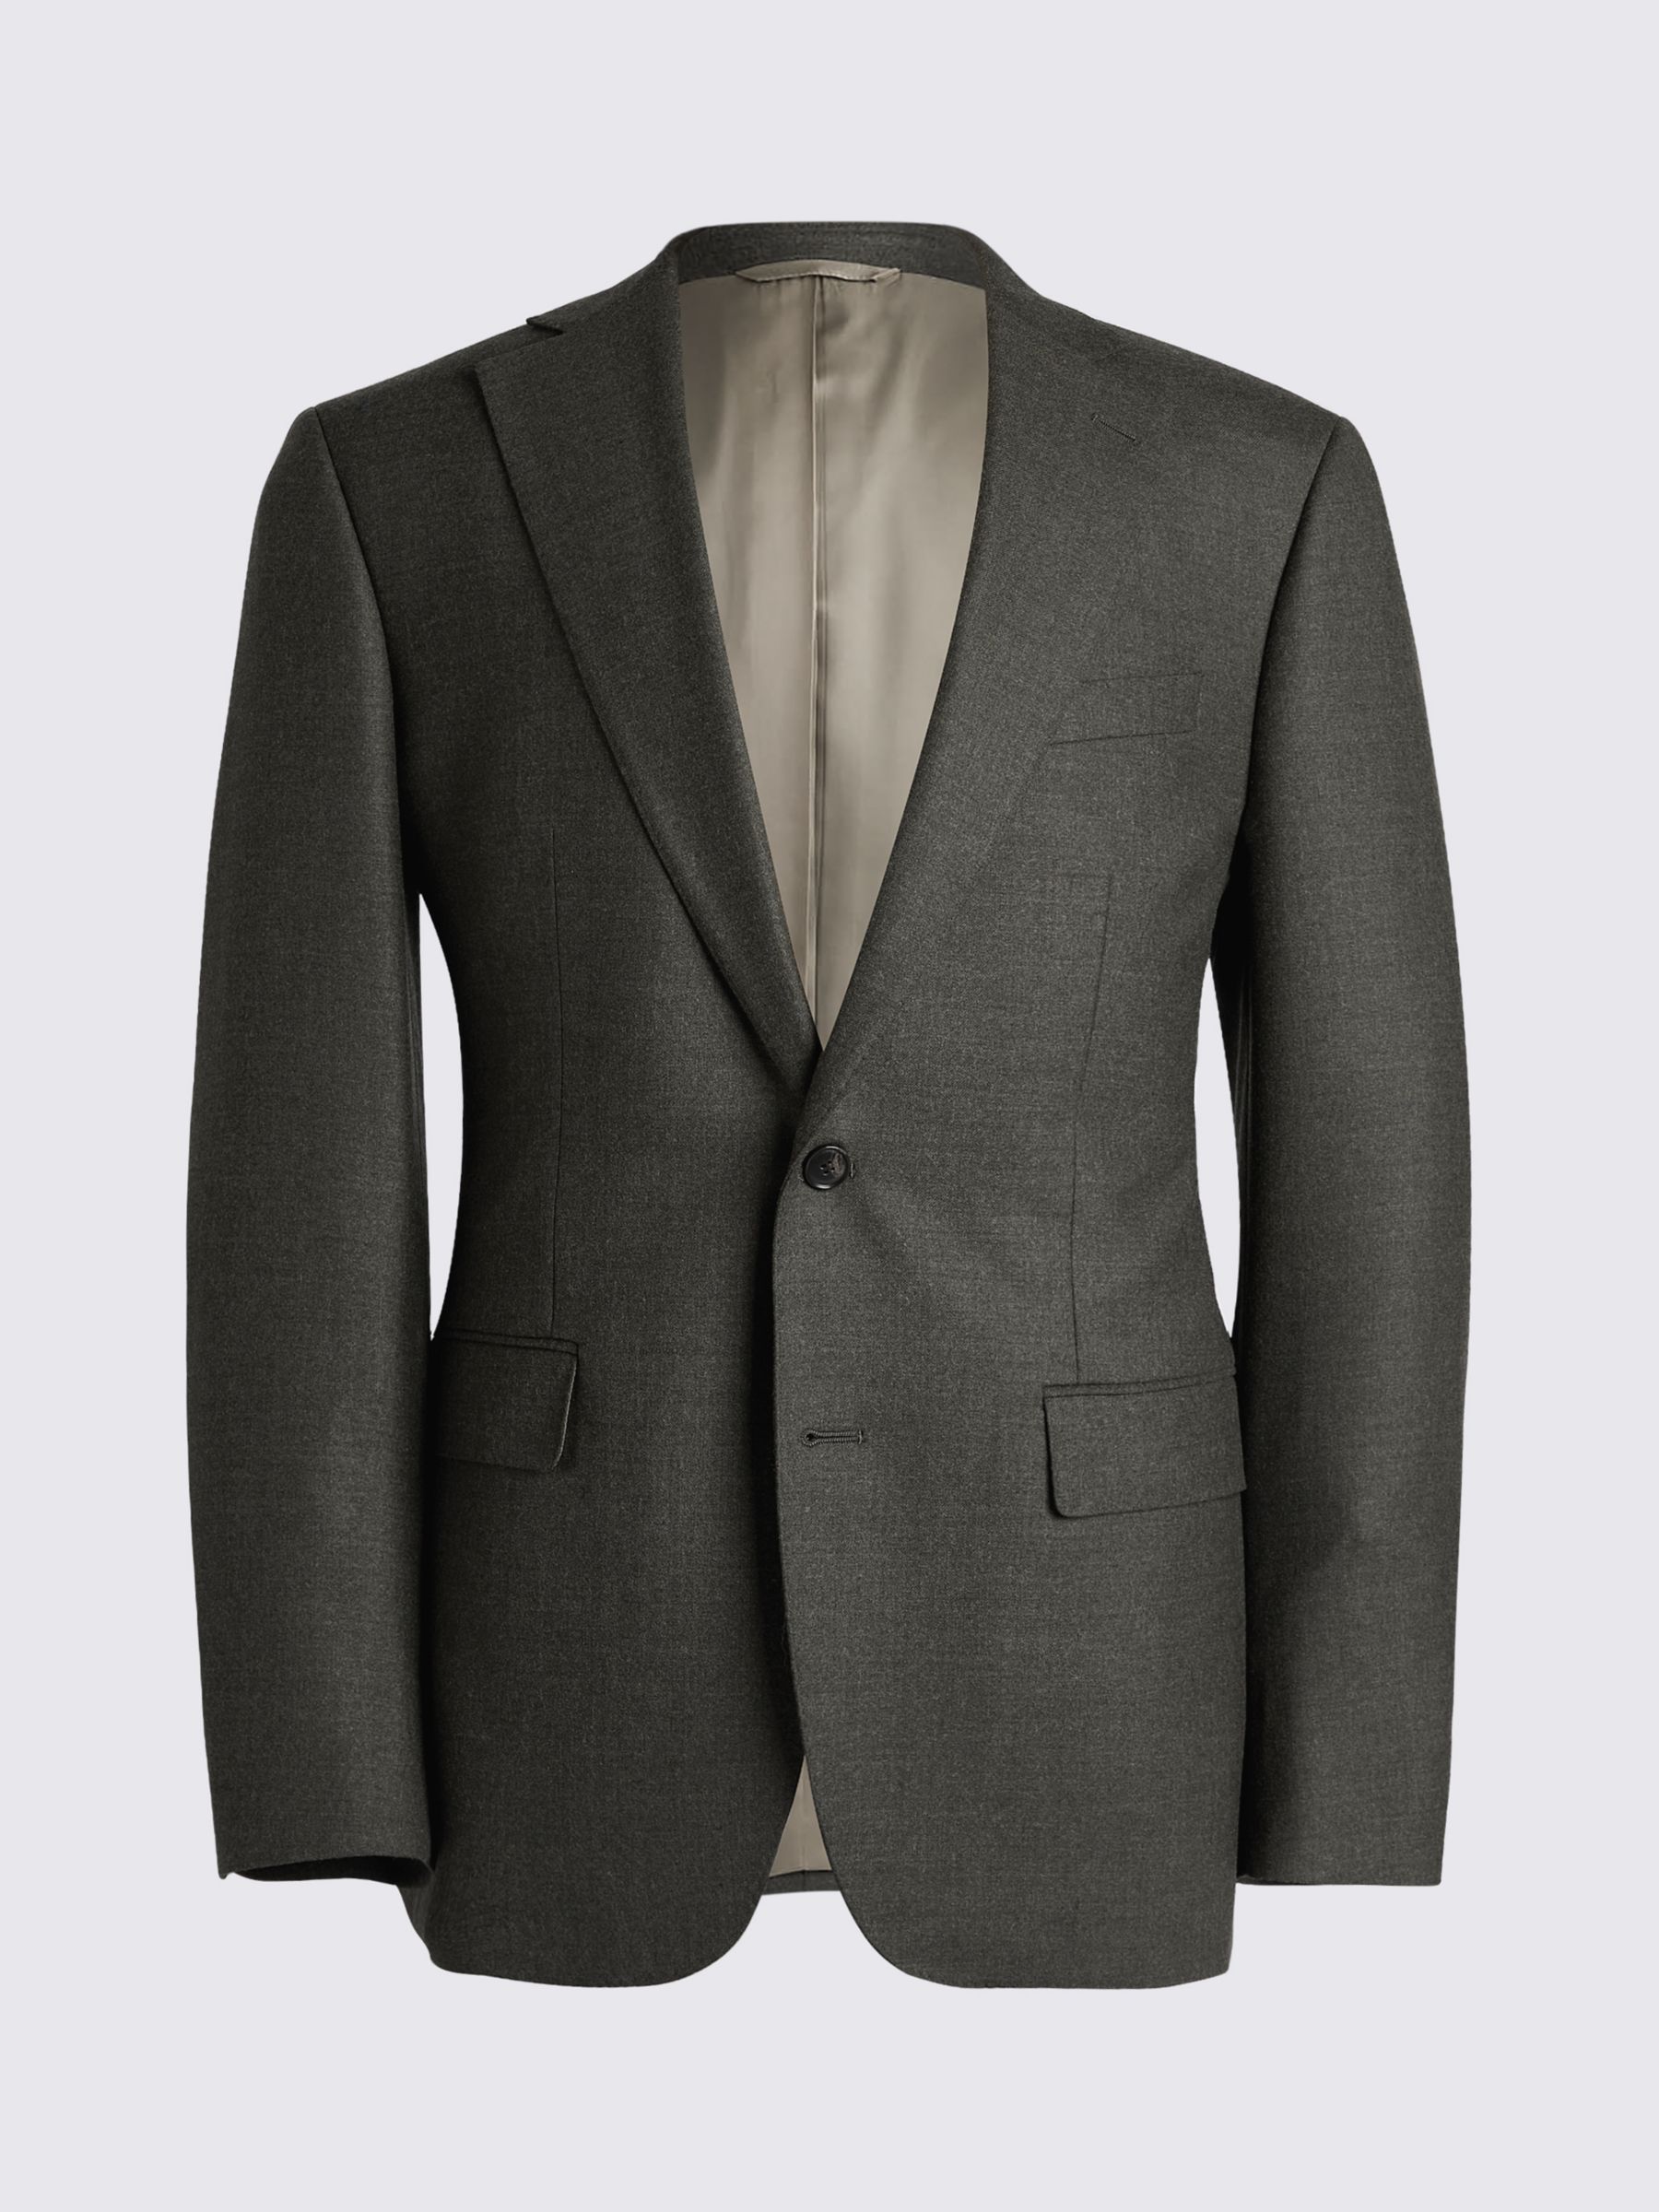 Moss Tailored Fit Performance Suit Jacket, Green, 46R